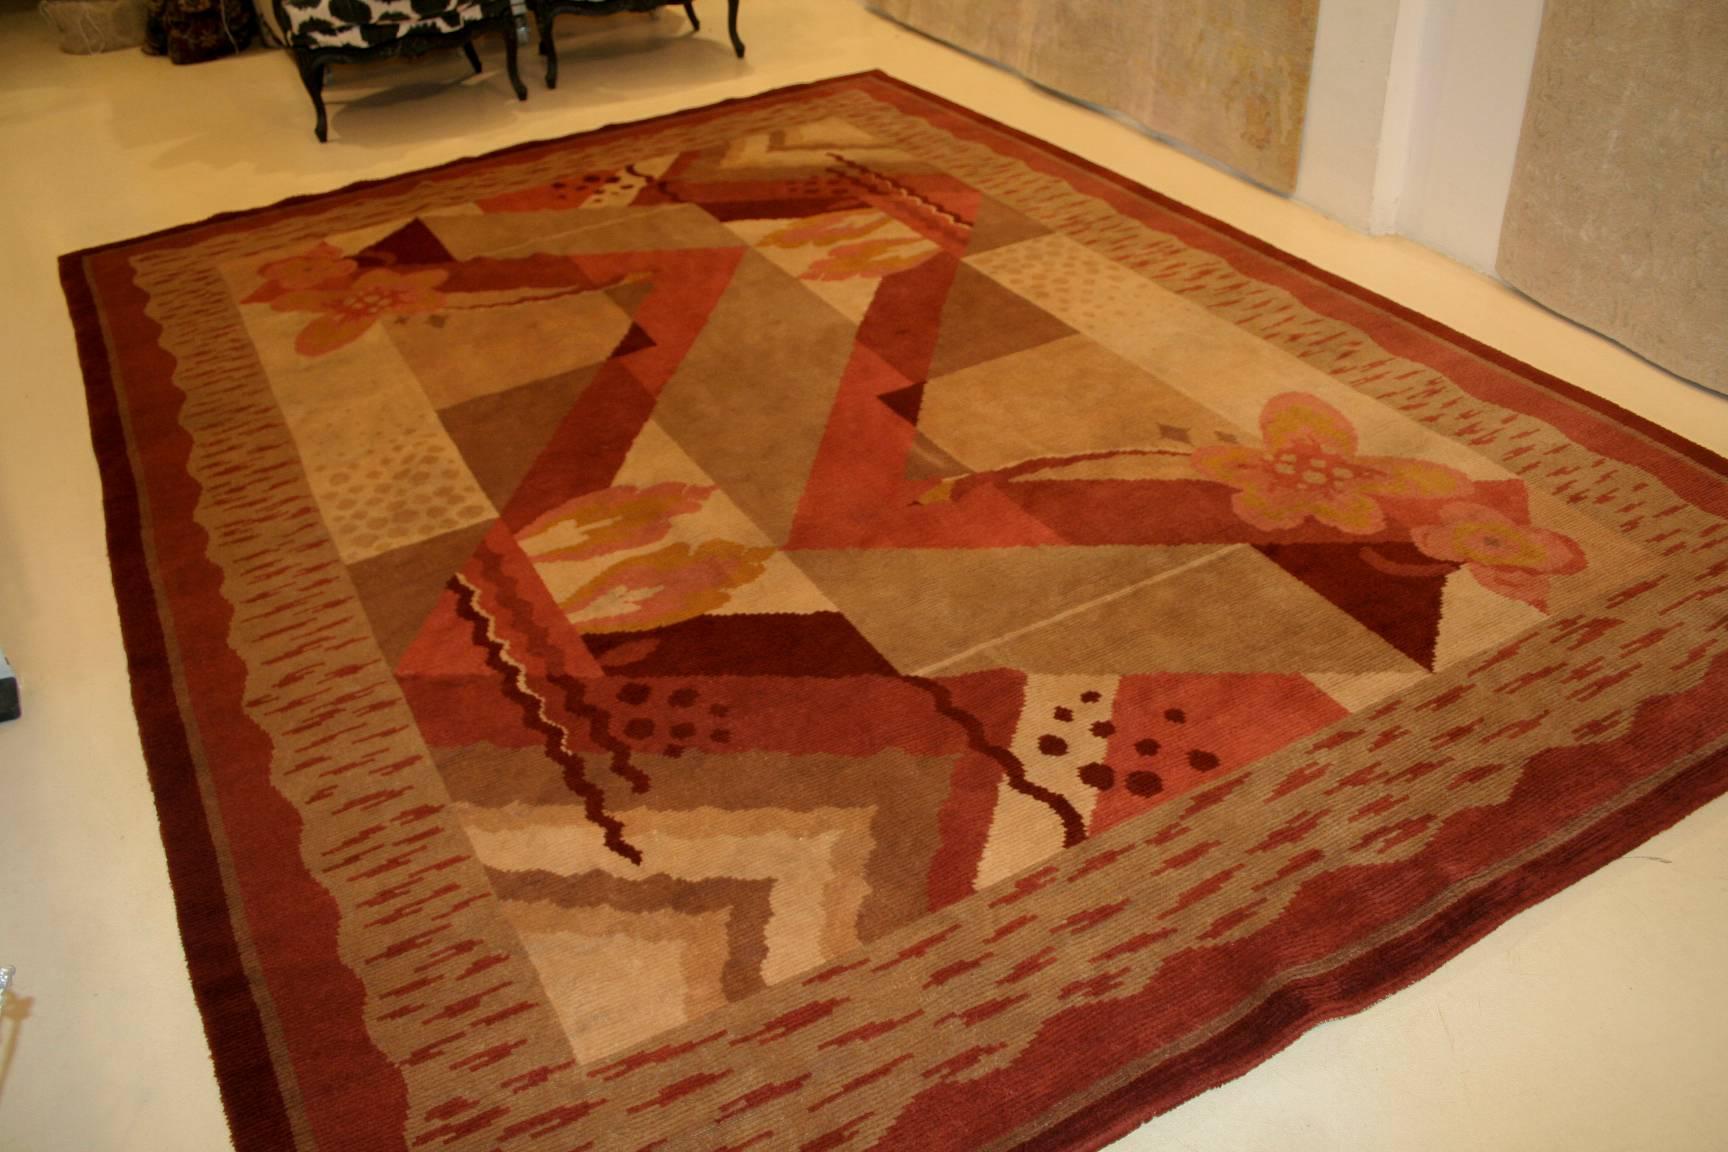 A rare and original French Art Deco rug featuring a characteristic geometric pattern. Designs such as the one seen here are influenced by Cubism and often seen on carpets such those woven by Ivan da Silva Bruhns. The floral embellishments are a